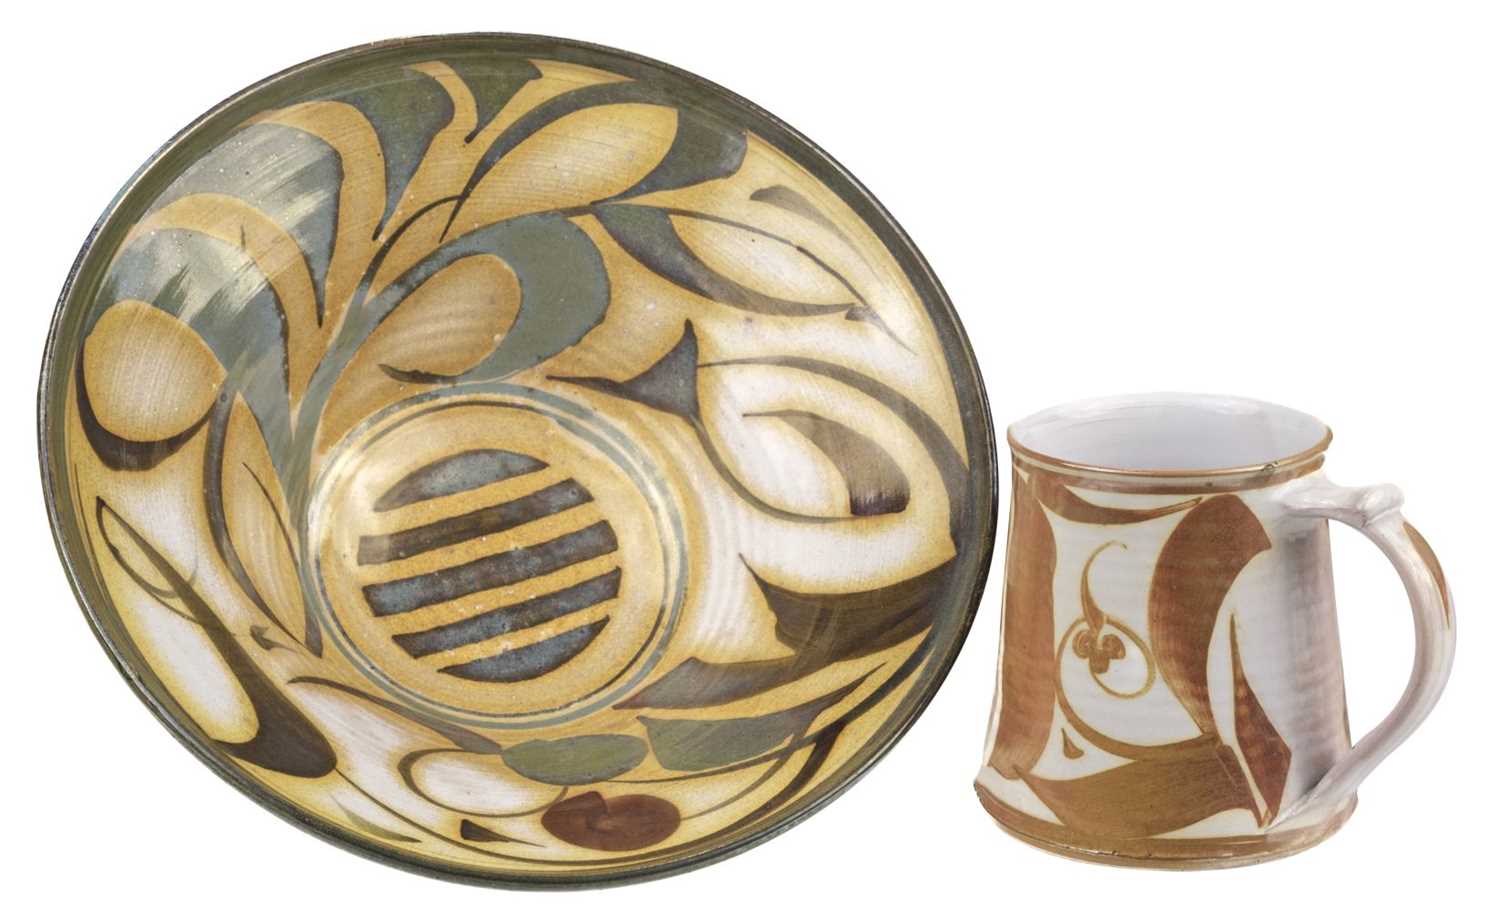 Lot 524 - Caiger-Smith MBE (Alan, 1930-2020) for Aldermaston Pottery. A yellow lustre bowl